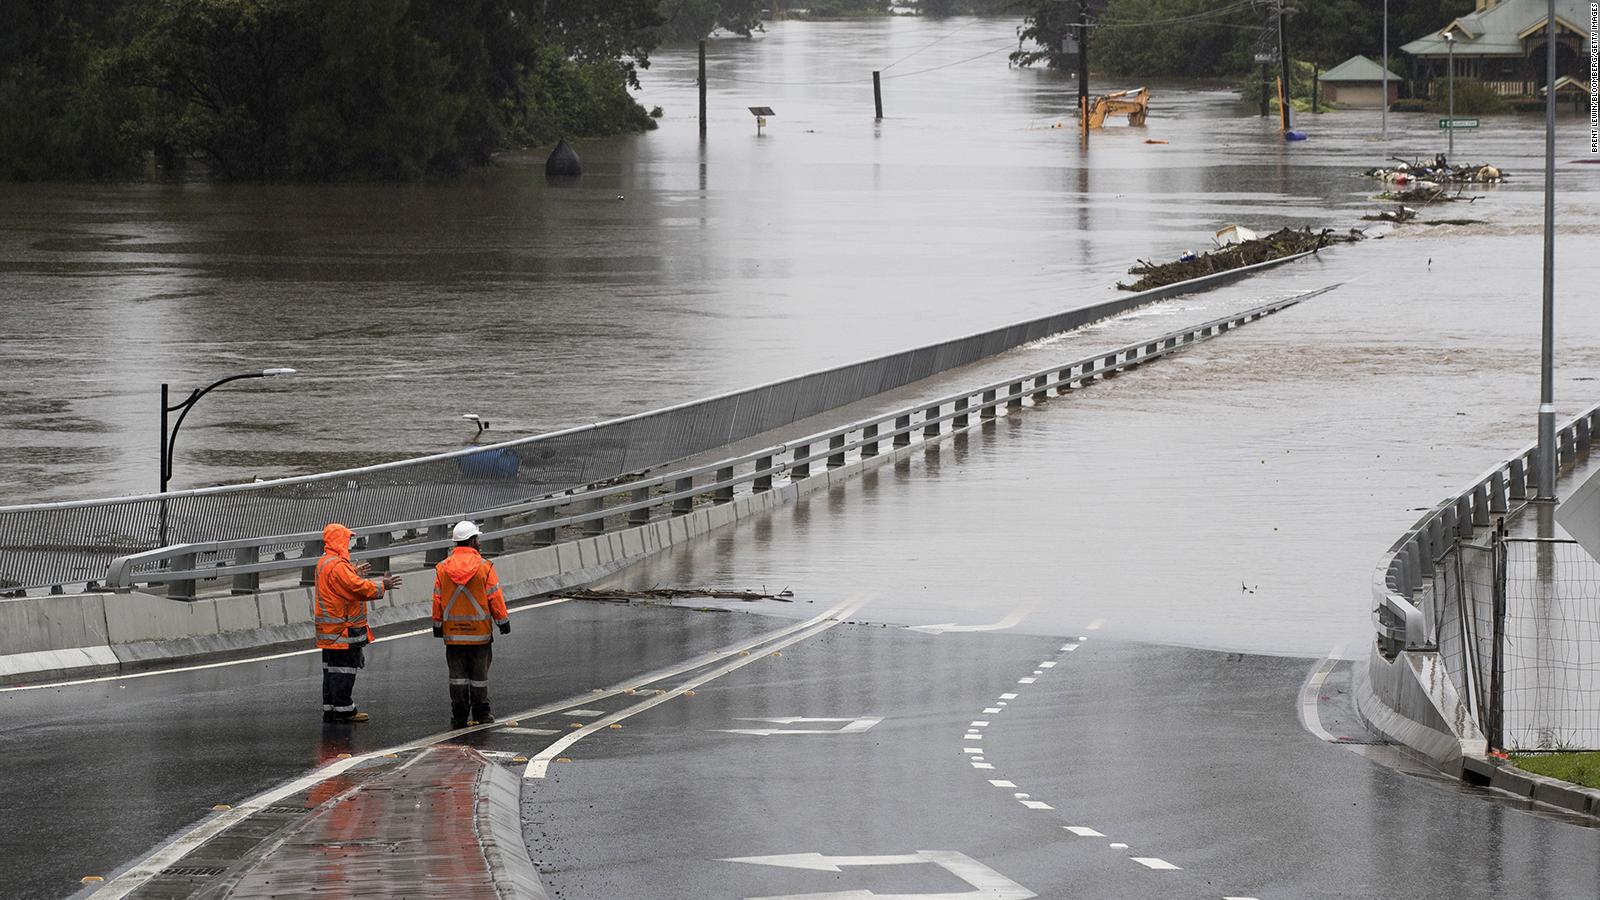 Australia floods Thousands evacuated in New South Wales as 'life